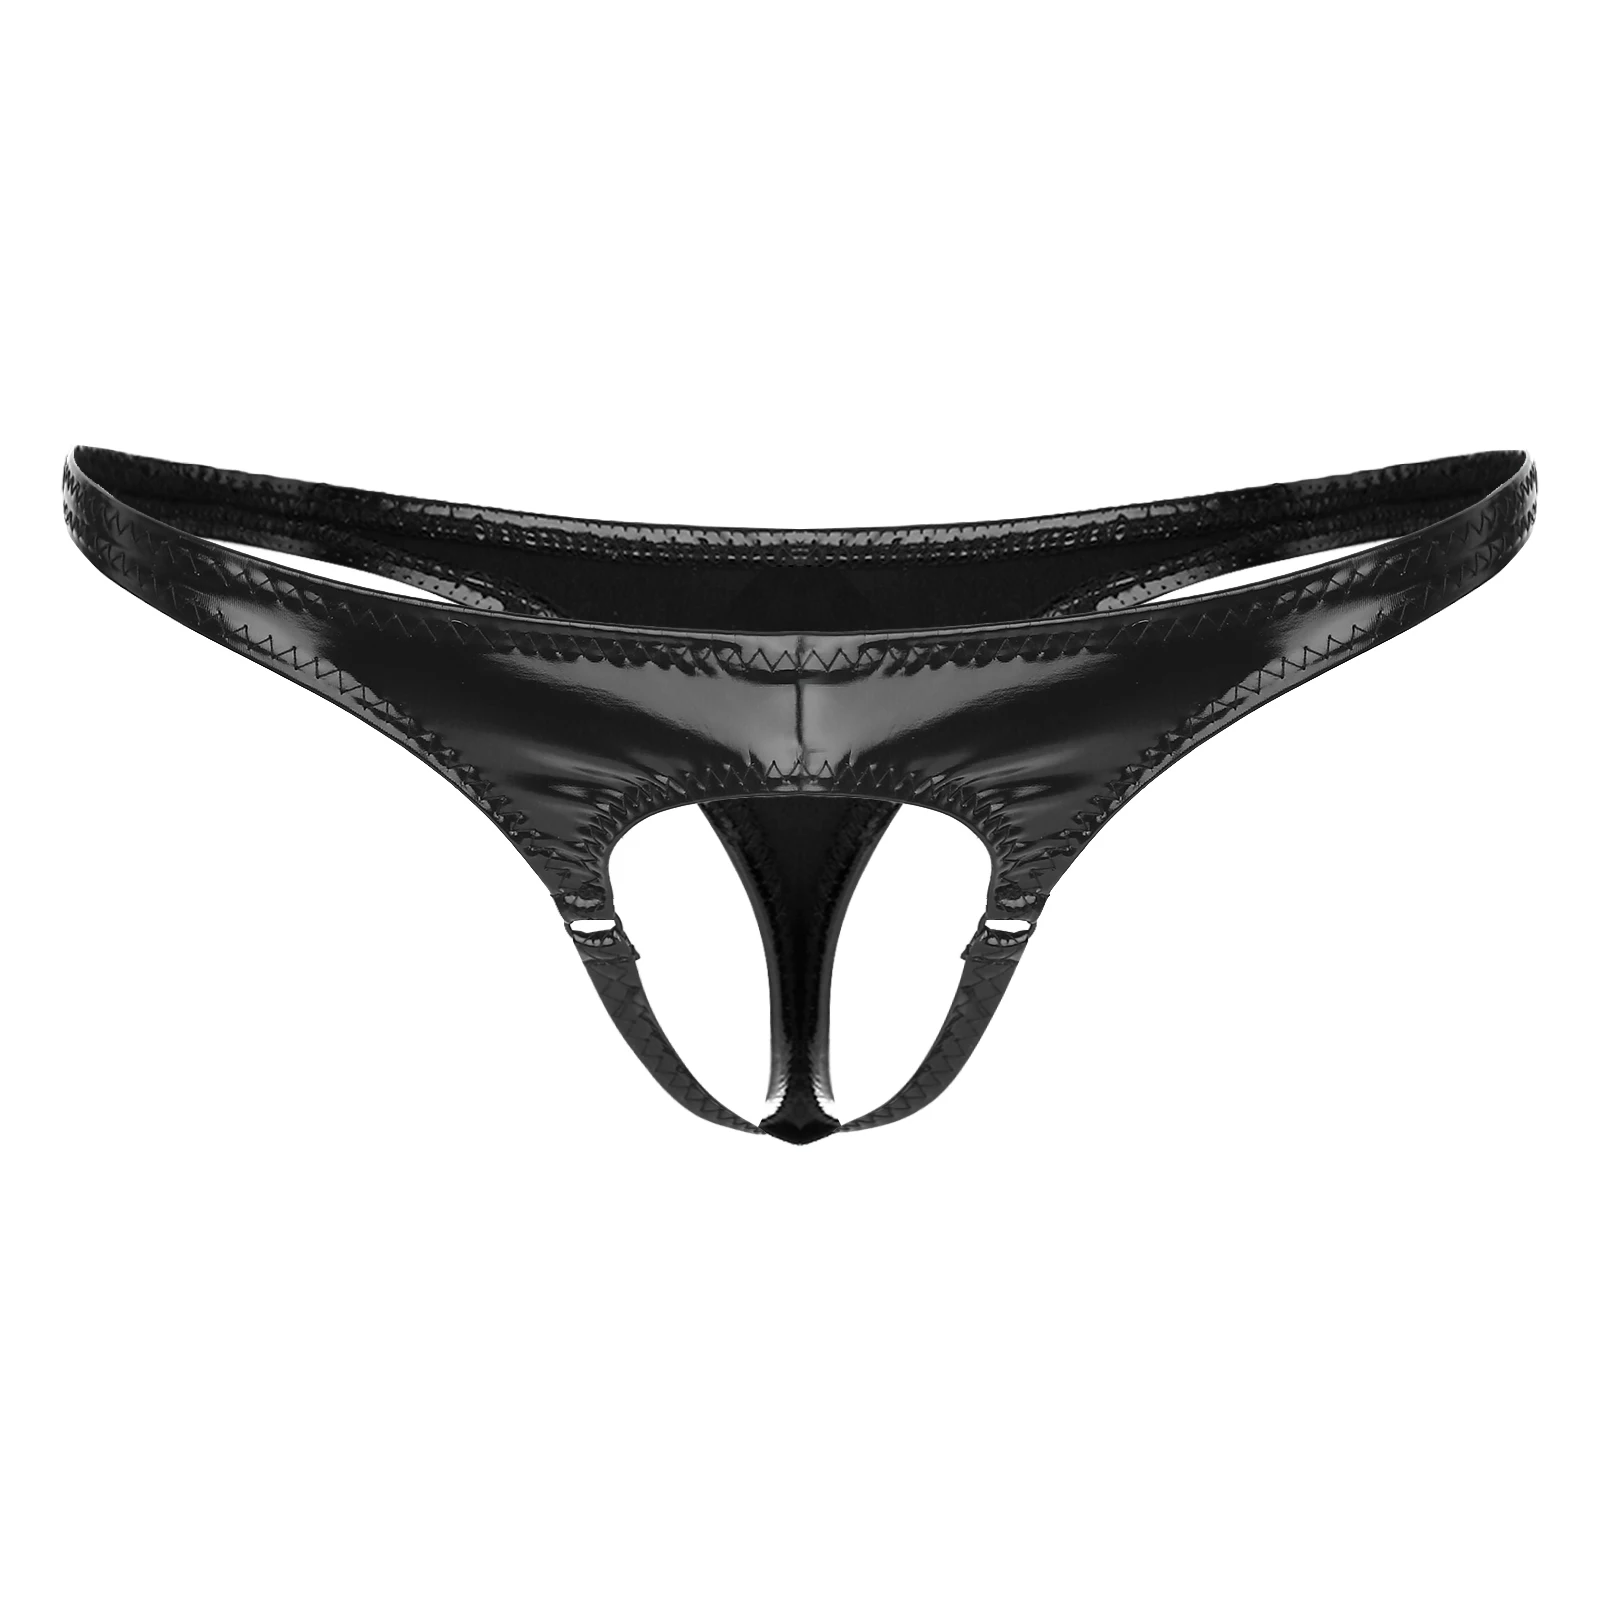 

Mens Lingerie Crotchless Patent Leather G-Strings Underwear Hollow Out Front Thong Wet Look Low Rise T-back Open Butt Underpants